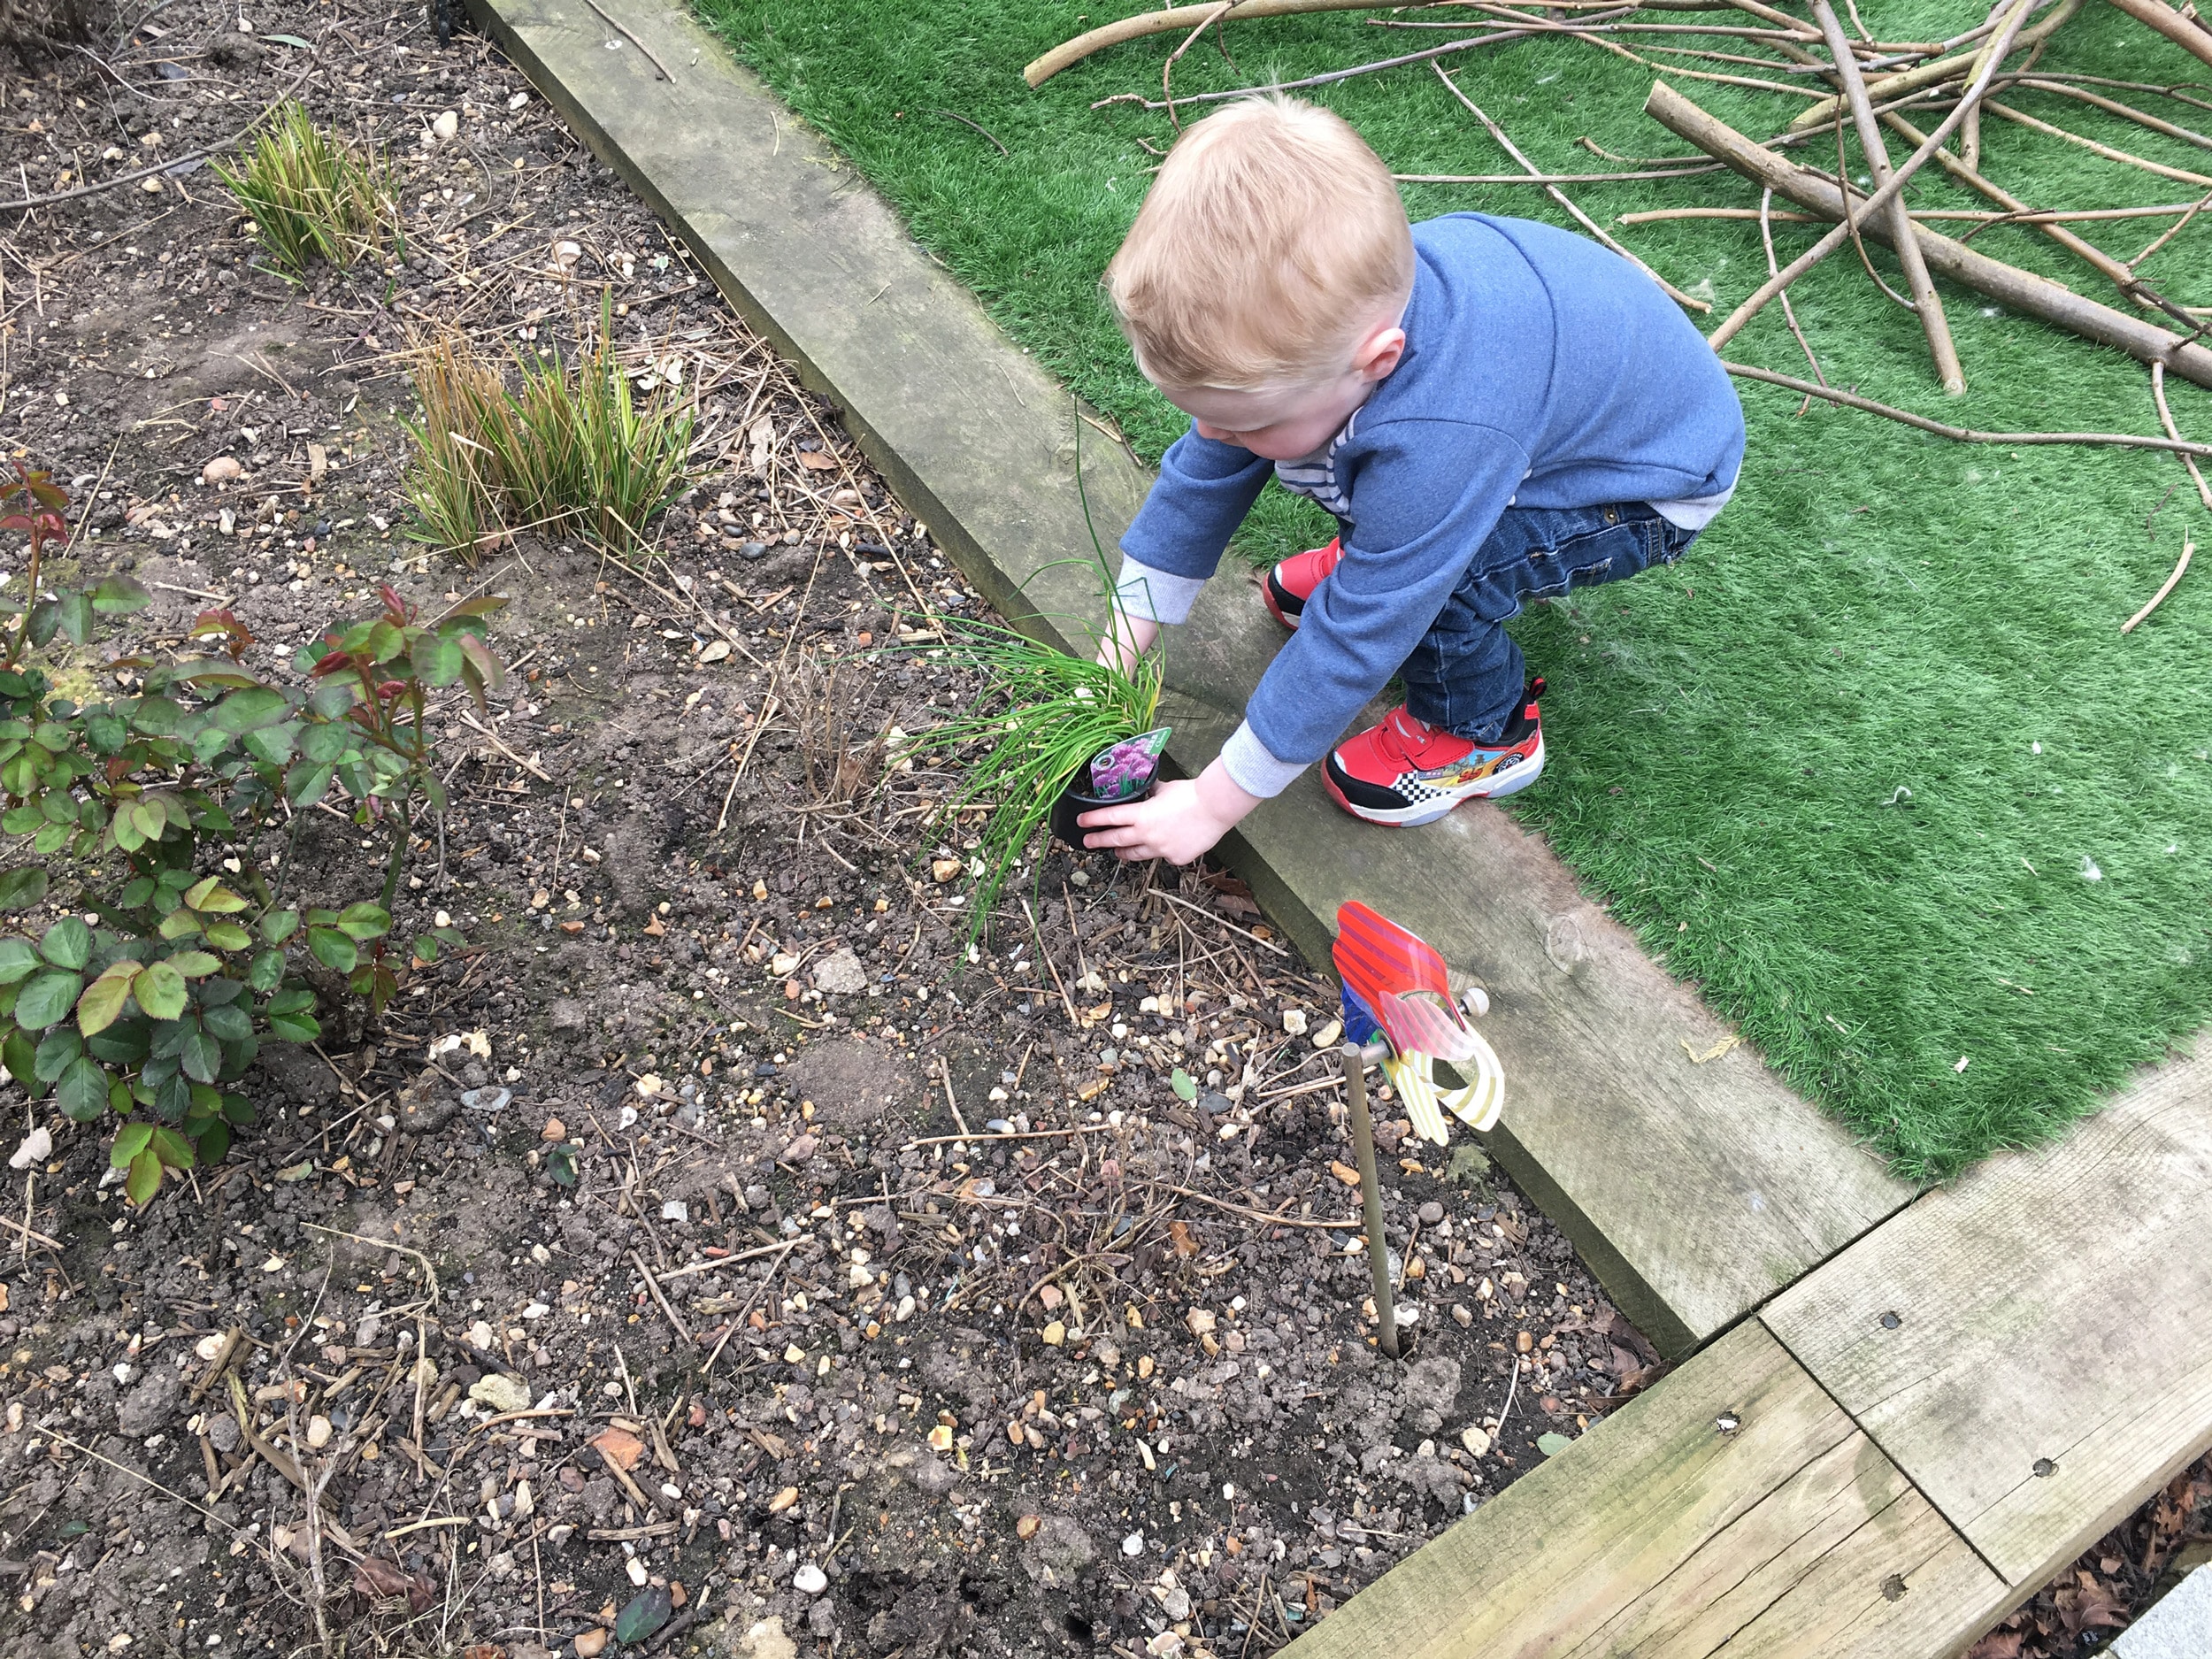 toddler planting herbs in the garden